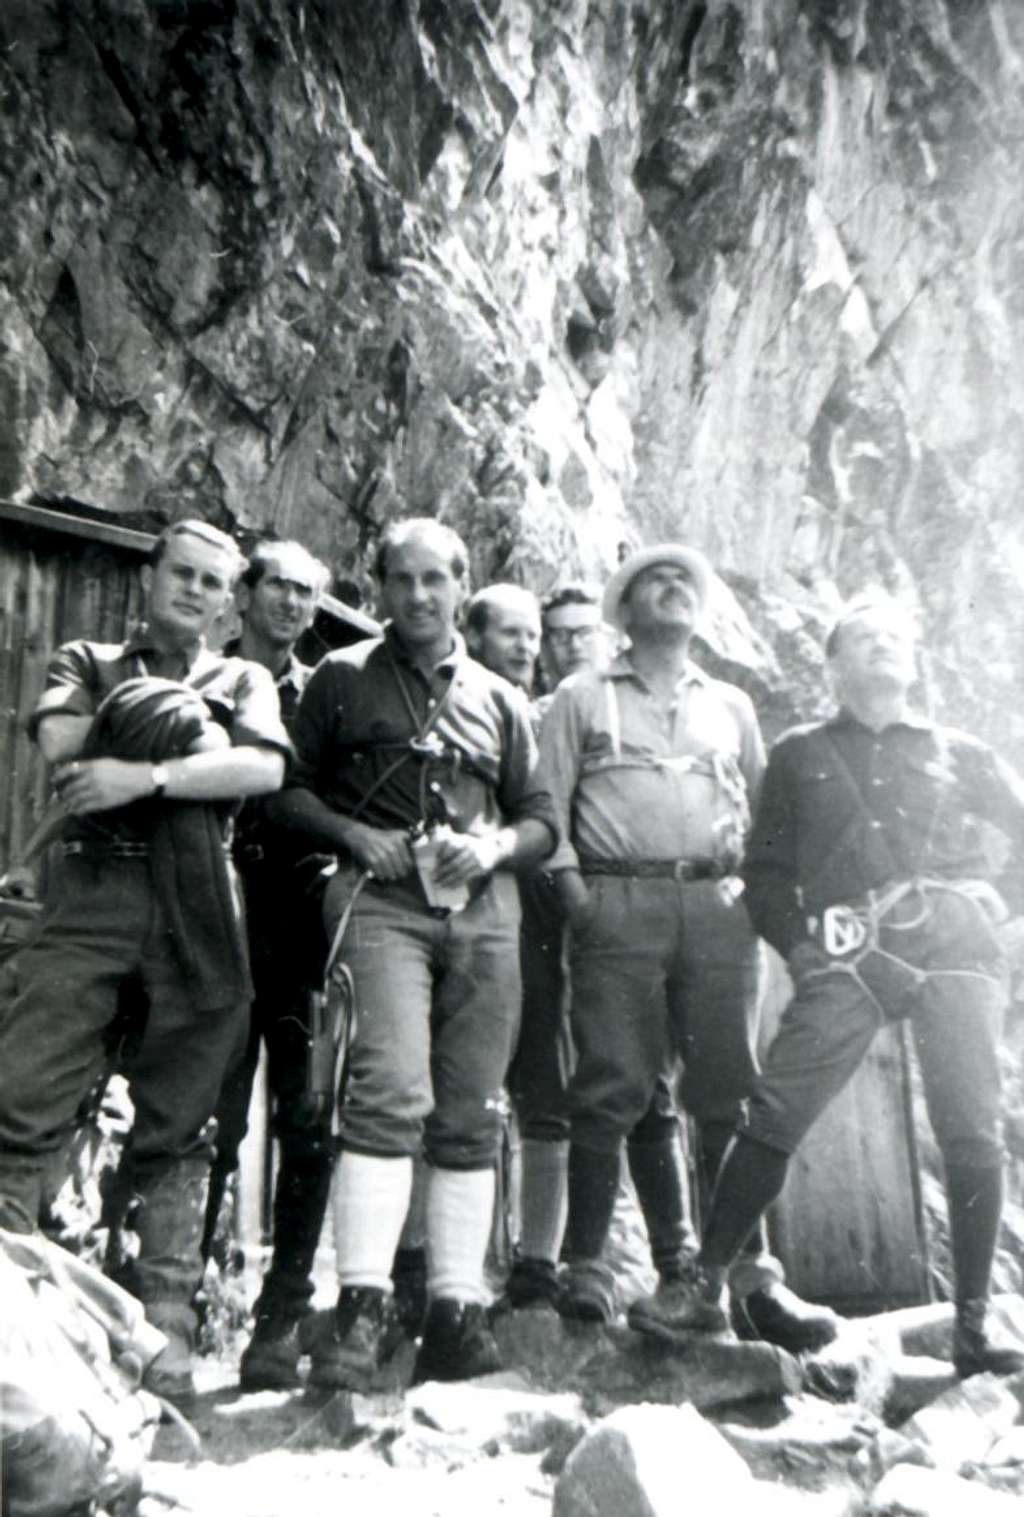 Chasseurs Pass Guides & Mountaineers in Val Veny 1968